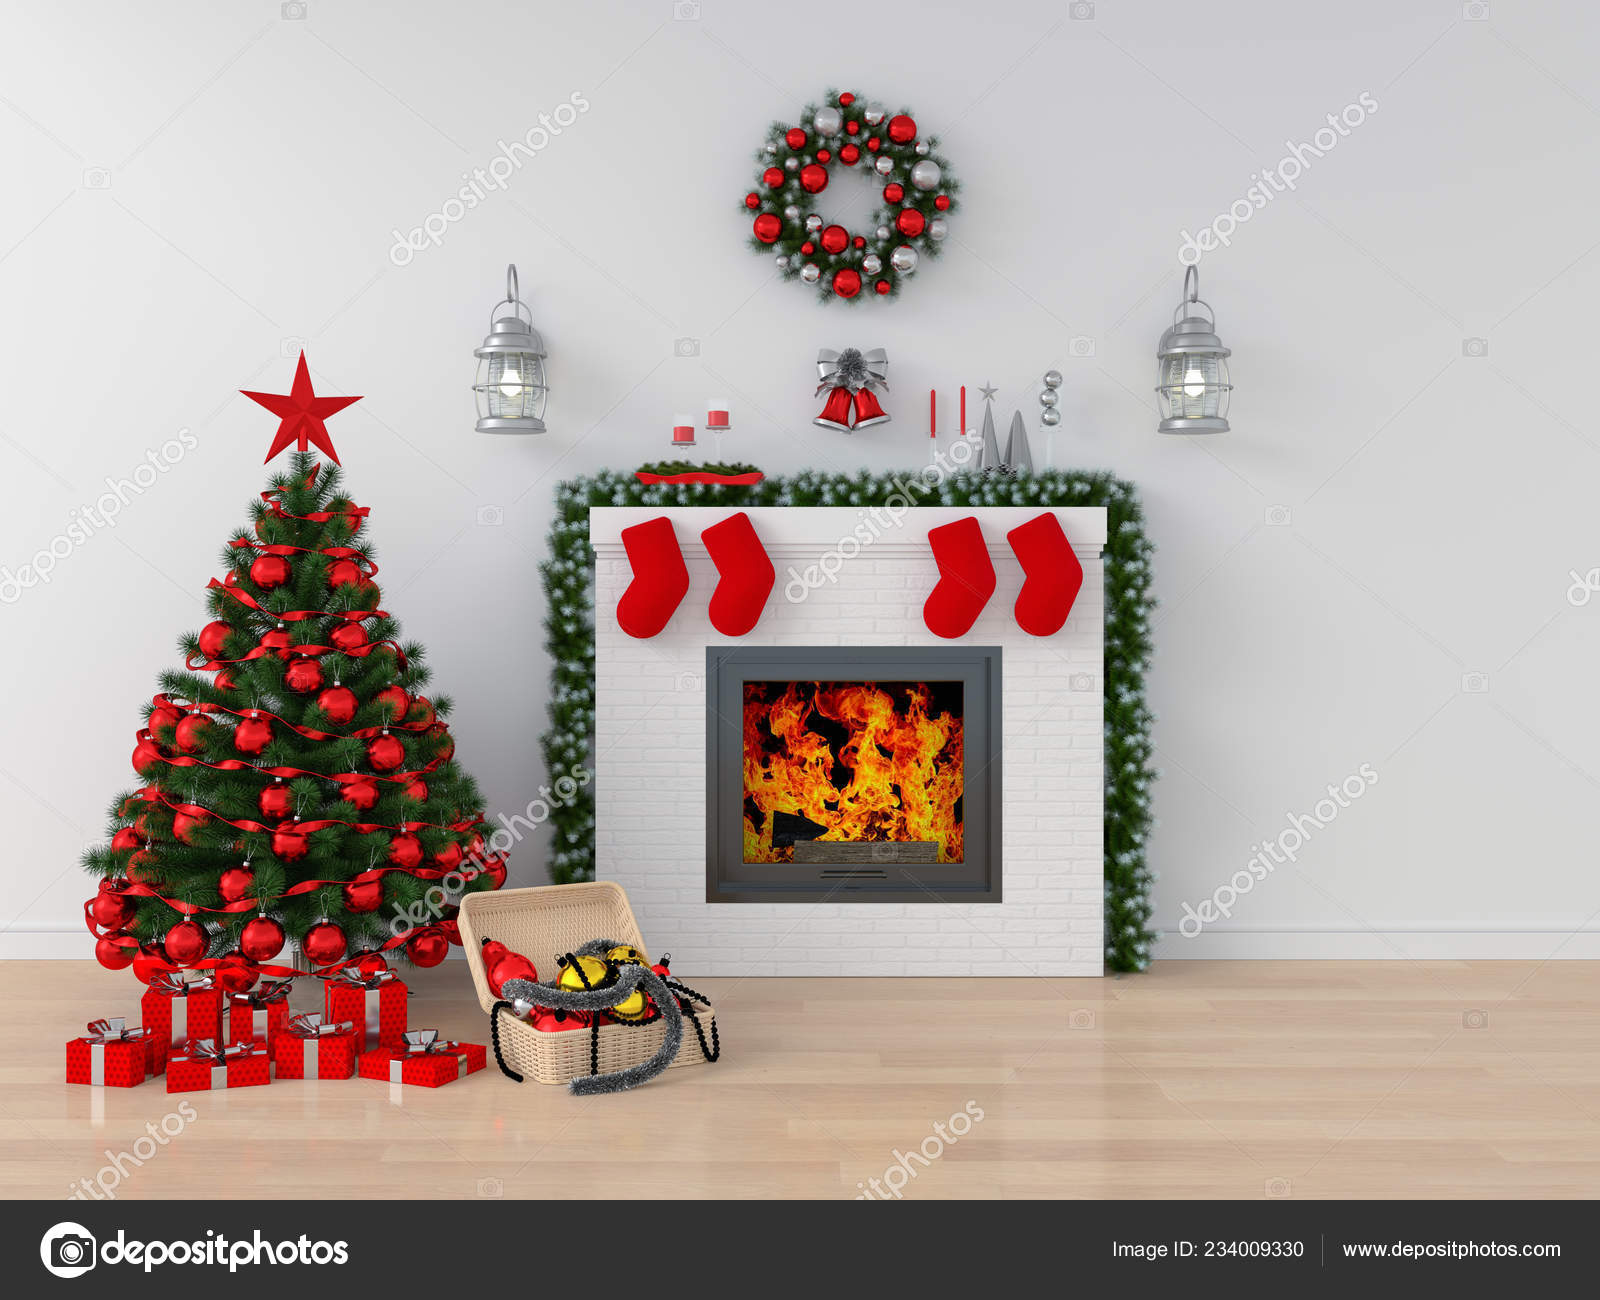 Download Christmas Tree Fireplace White Room Mockup Rendering Stock Photo Image By C Wuttichaijanglab 234009330